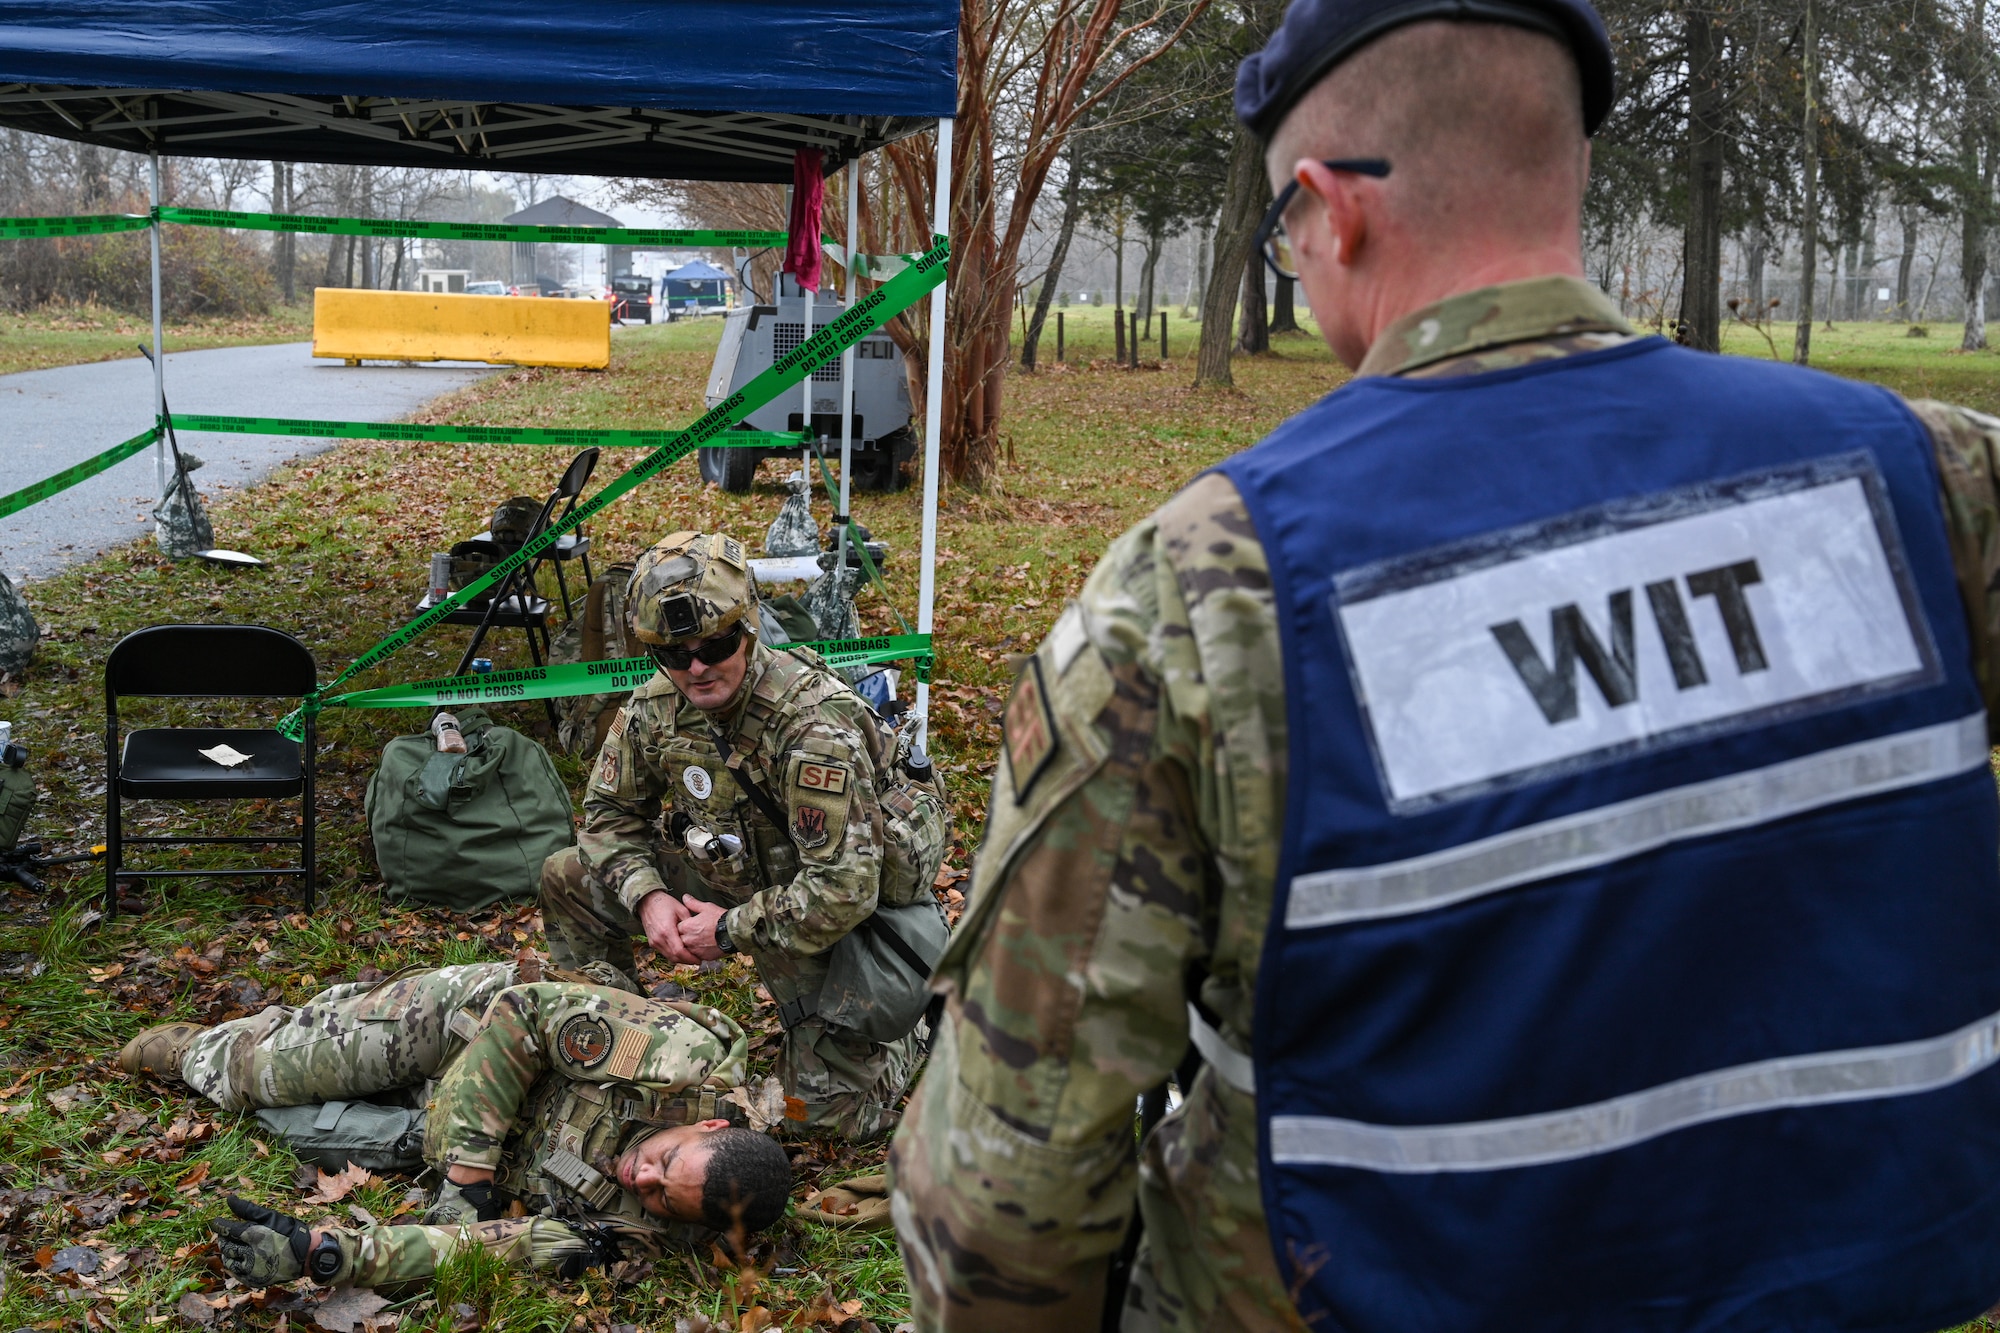 Maryland Air National Guard Staff Sgt. William Taylor, 175th Security Forces Squadron, checks on a simulated casualty during Operation Frosty Strike at Martin State Air National Guard Base, Middle River, Maryland, Dec. 2, 2023.